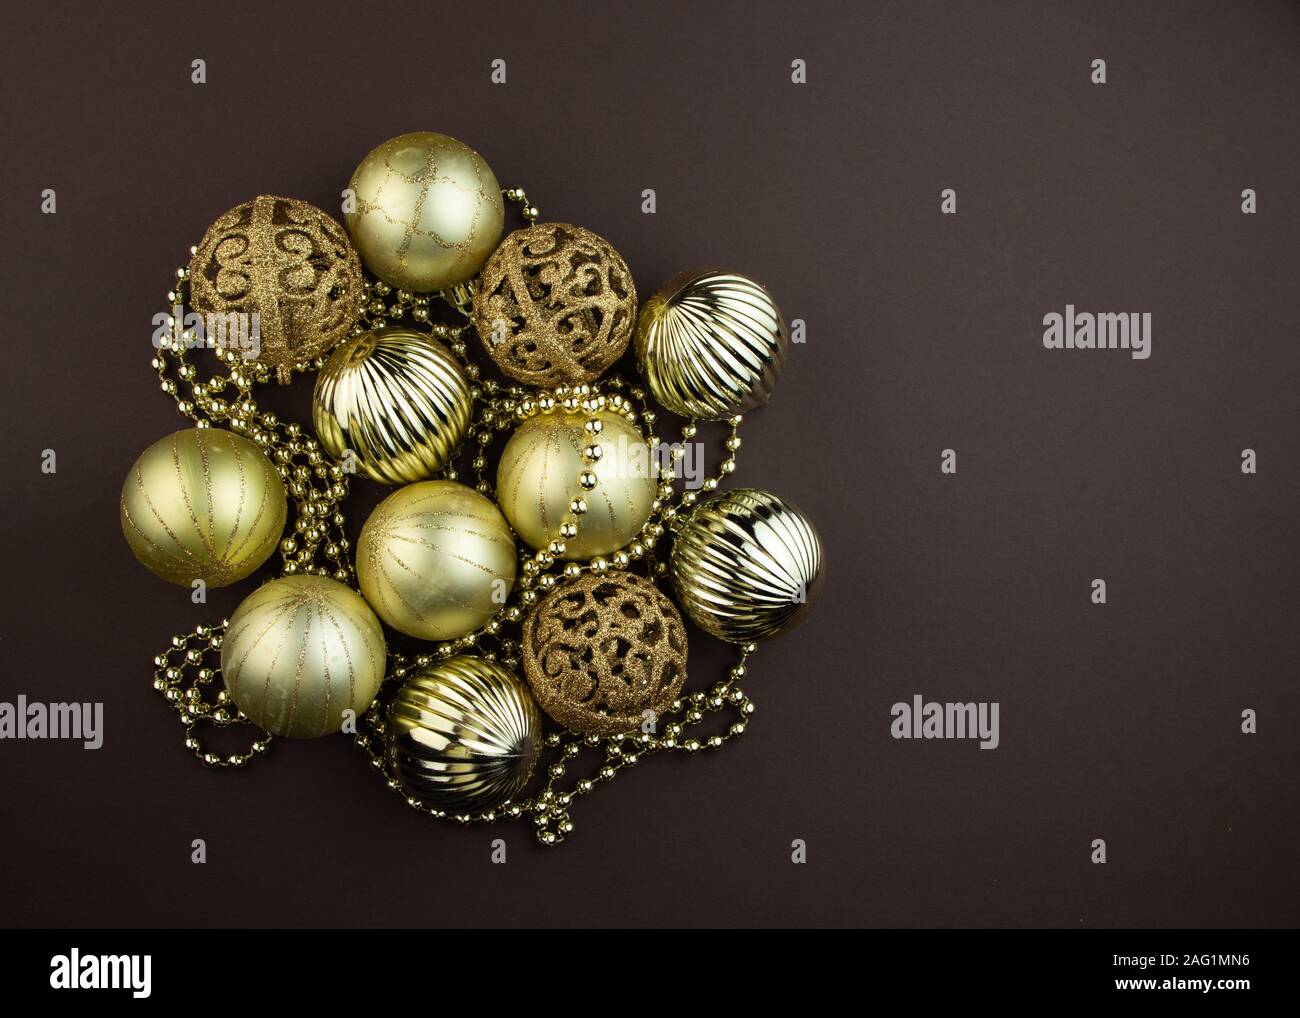 Golden sparkly Christmas balls on brown background. Magic holiday card. Christmas or New Year festive composition. Stock Photo